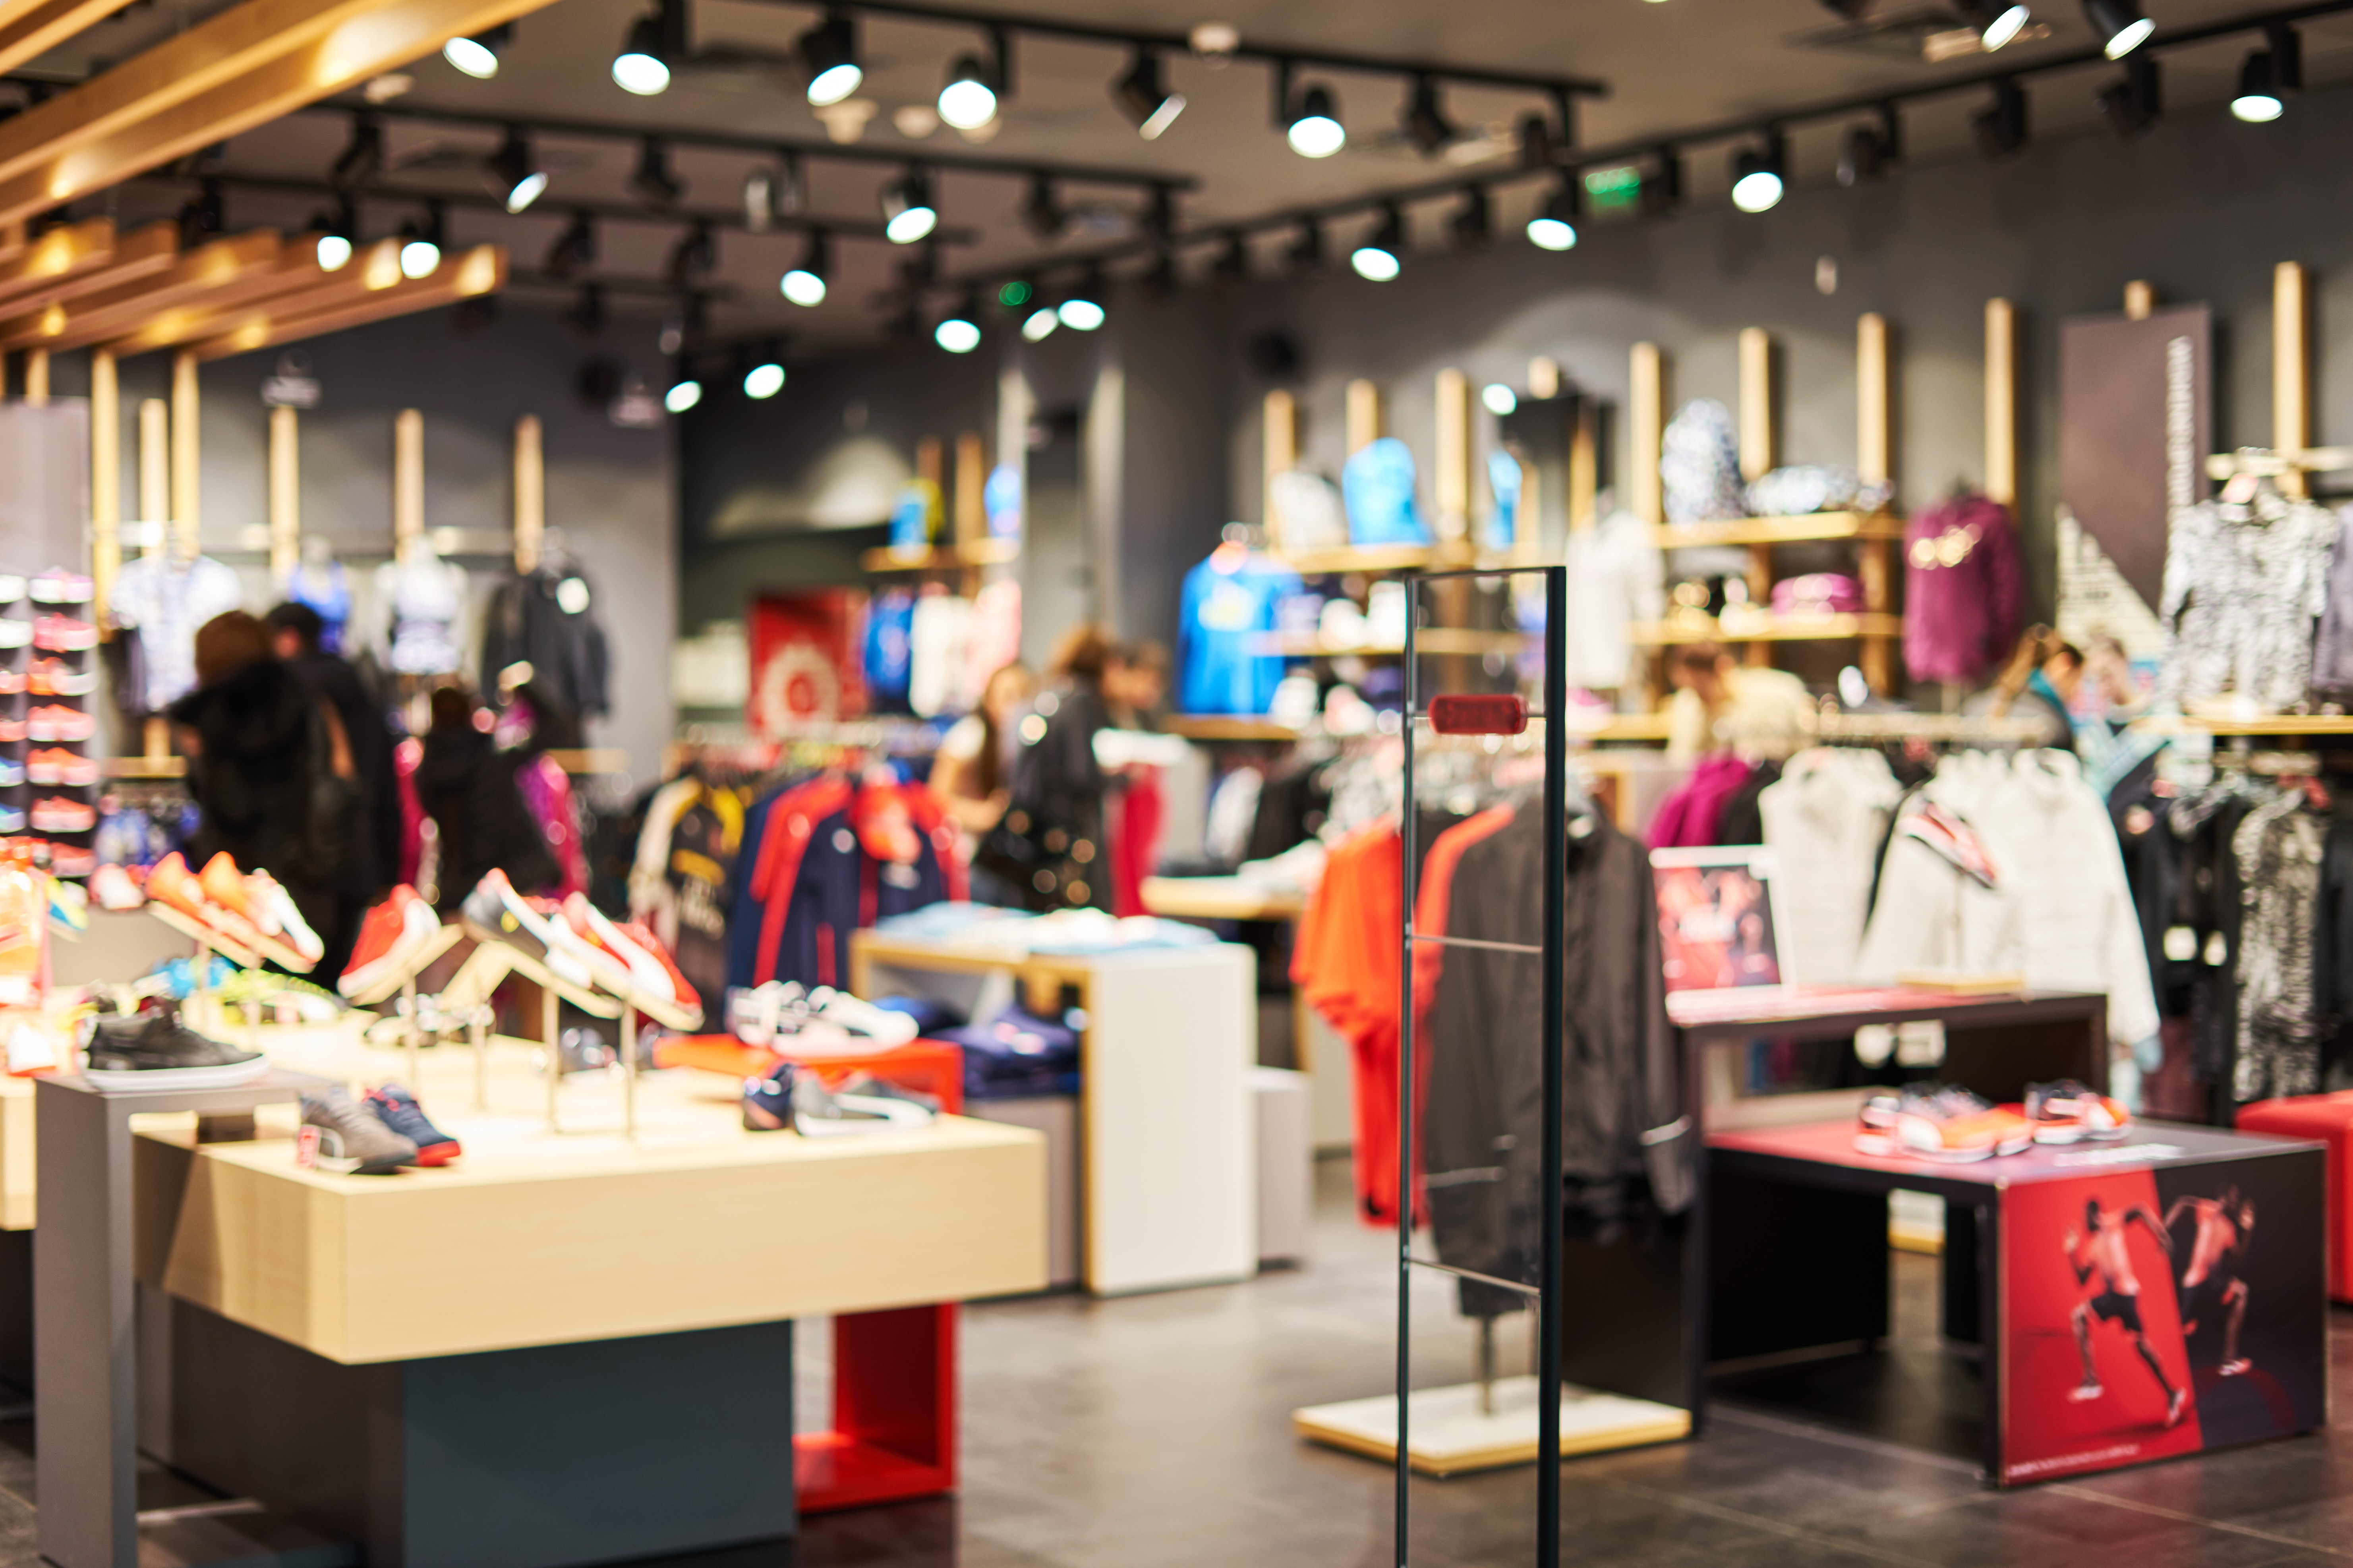 4 UPCOMING TRENDS ON THE RETAIL FLOOR